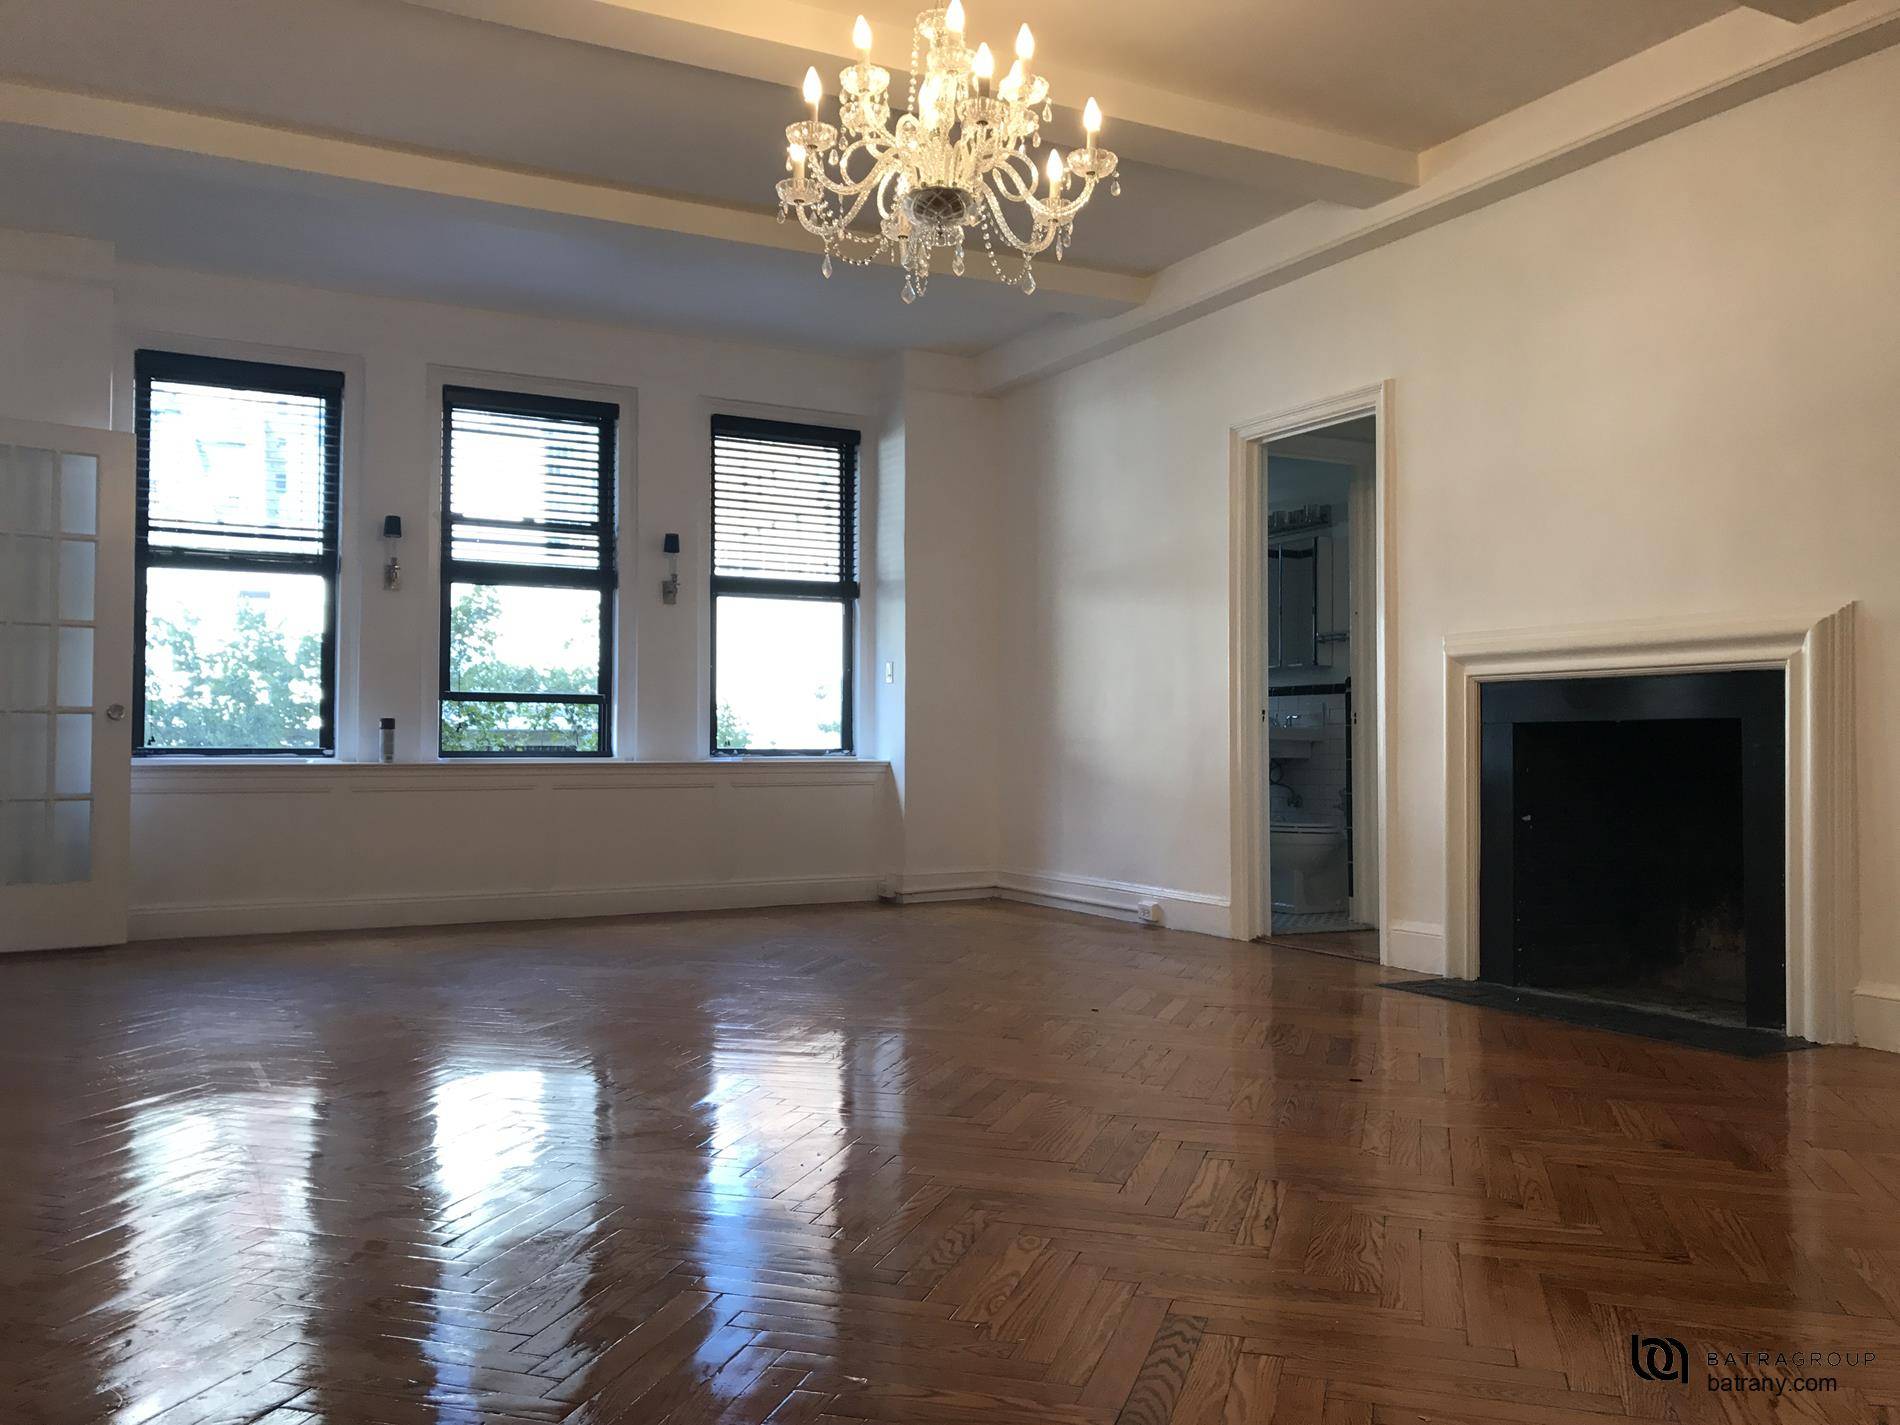 Gorgeous Boutique PreWar Doorman BuildingClose to All TrainsMorgan Library AreaMassive Convertible 3 BedroomOriginal Classic Details ThroughoutVery Large Living RoomWoodBurning Fire PlaceGorgeous Herringbone Hardwood FloorsHuge WindowedEat In KitchenStone